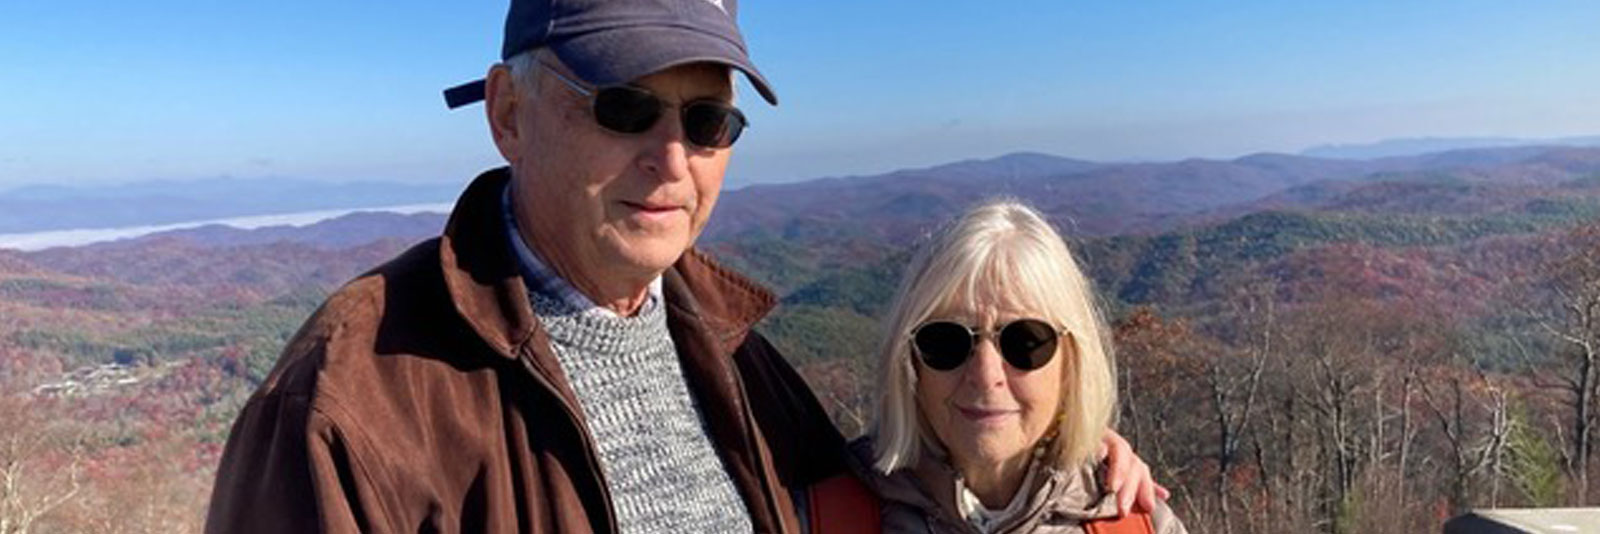 Tom and Sandy enjoying a scenic autumn vista in the Blue Ridge Mountains